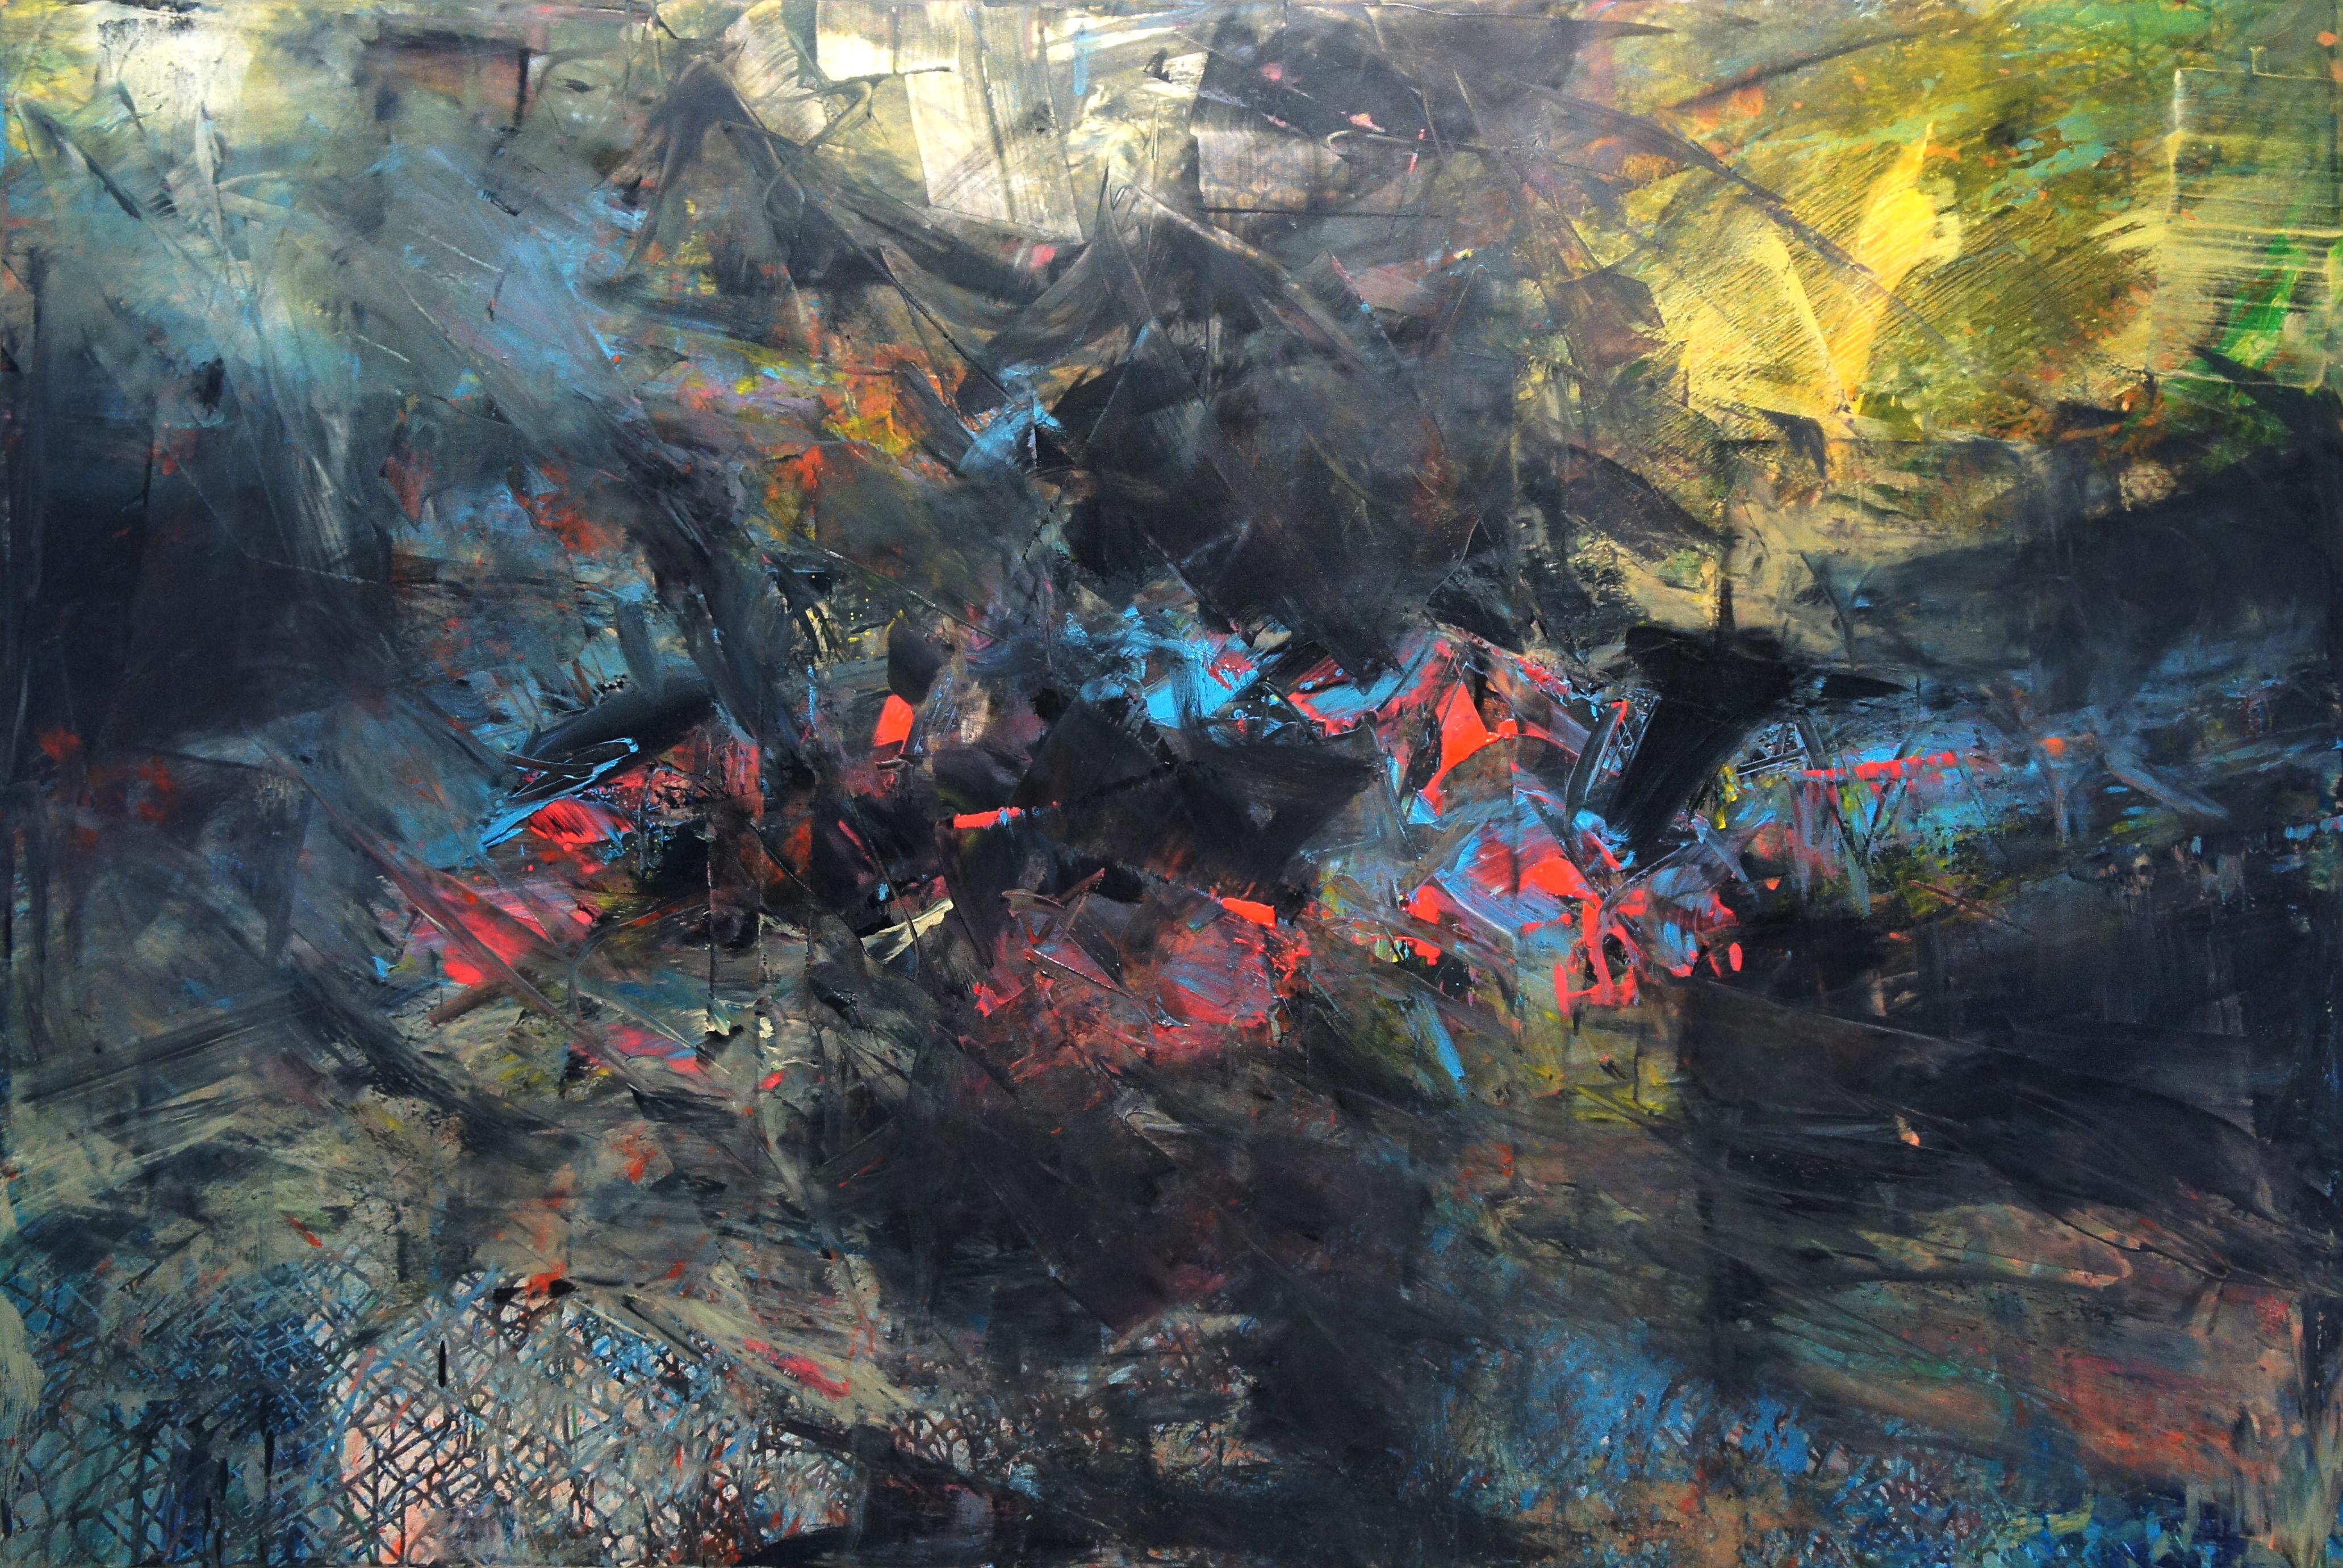 Hsu Tung Lung Abstract Painting - Memory Landscape no7 - Oil Absrtact Painting, 2020